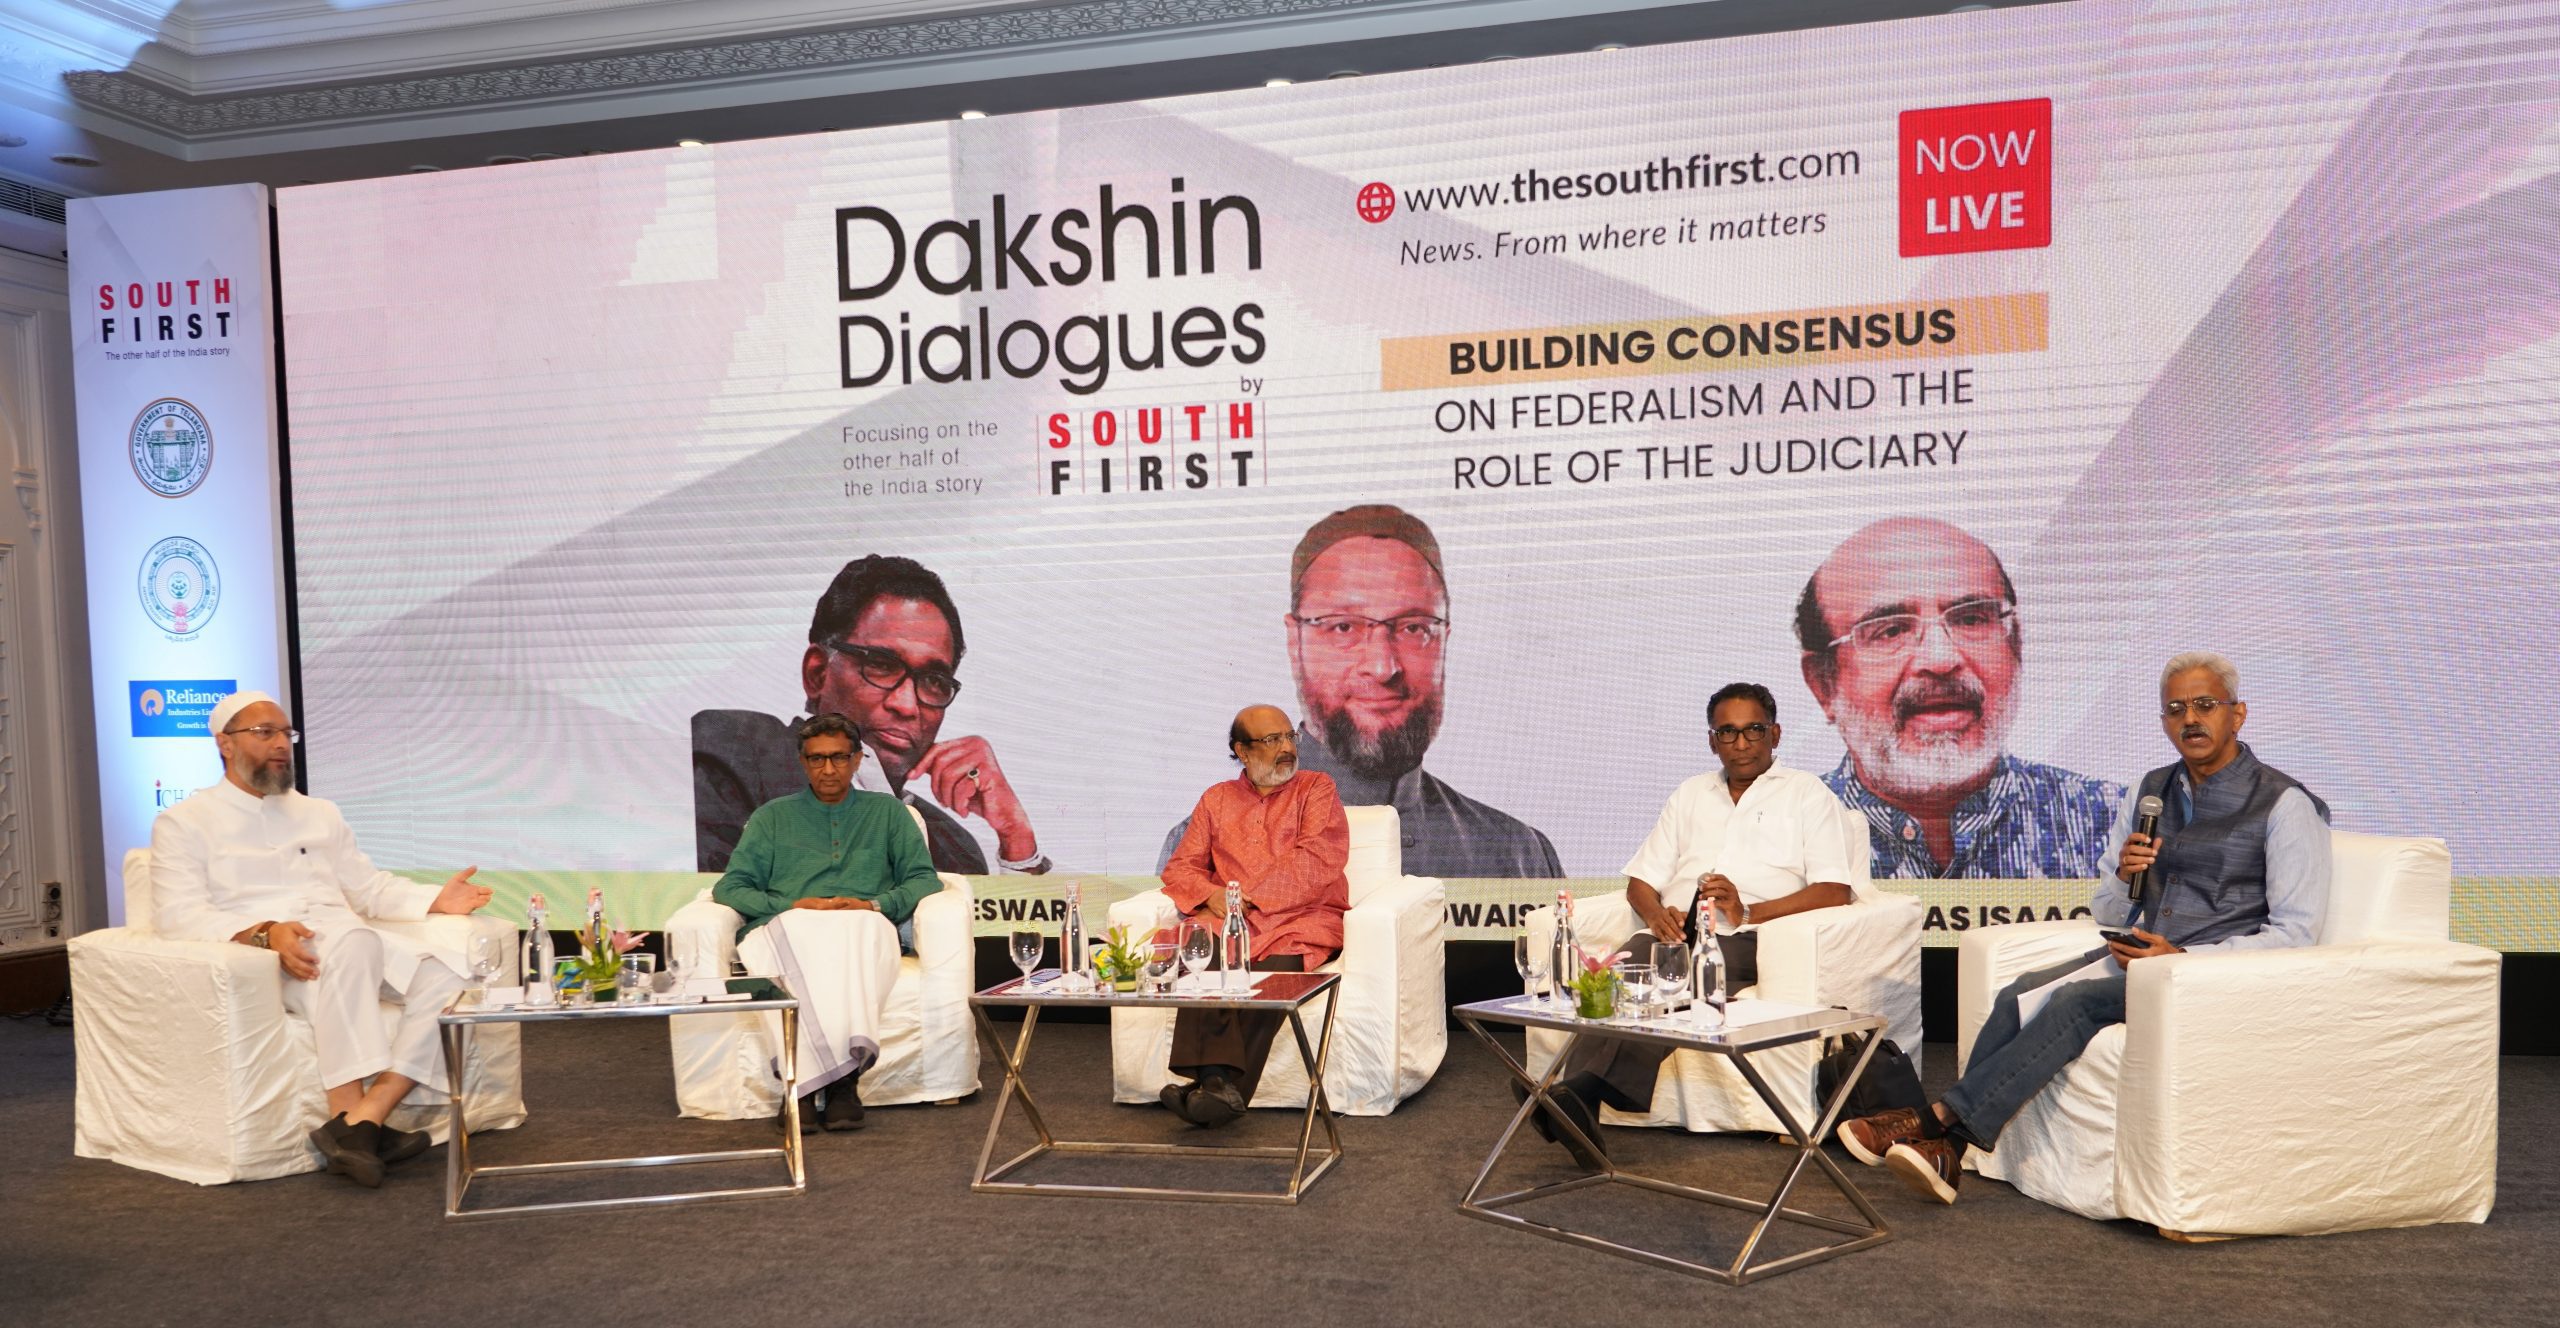 Southern states need to join hands and assert themselves to save federalism: Speakers at Dakshin Dialogues